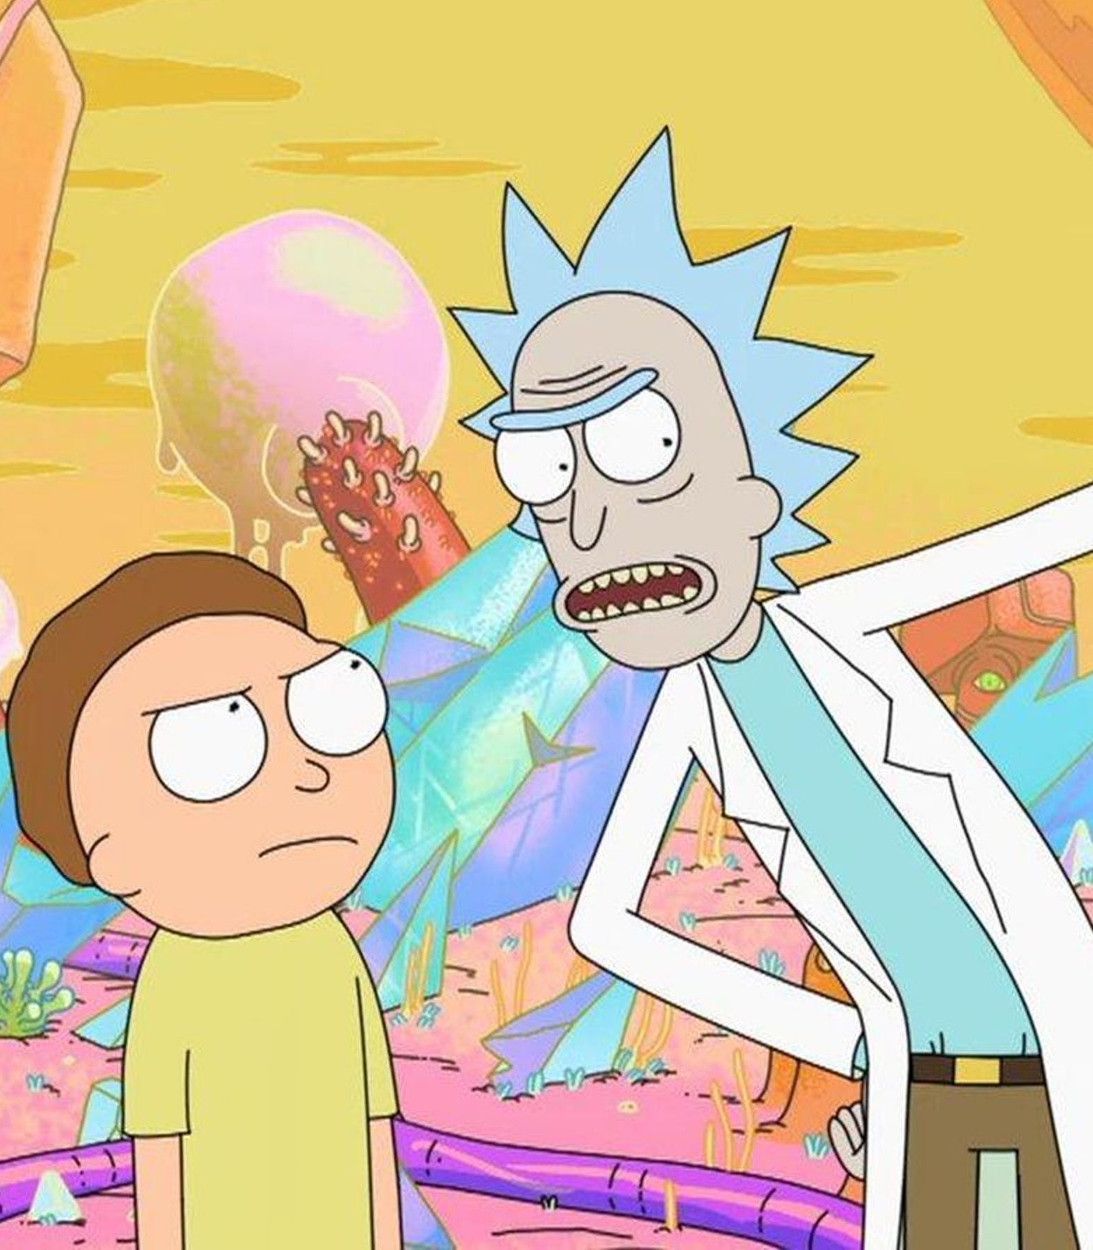 Rick and Morty having a discussion